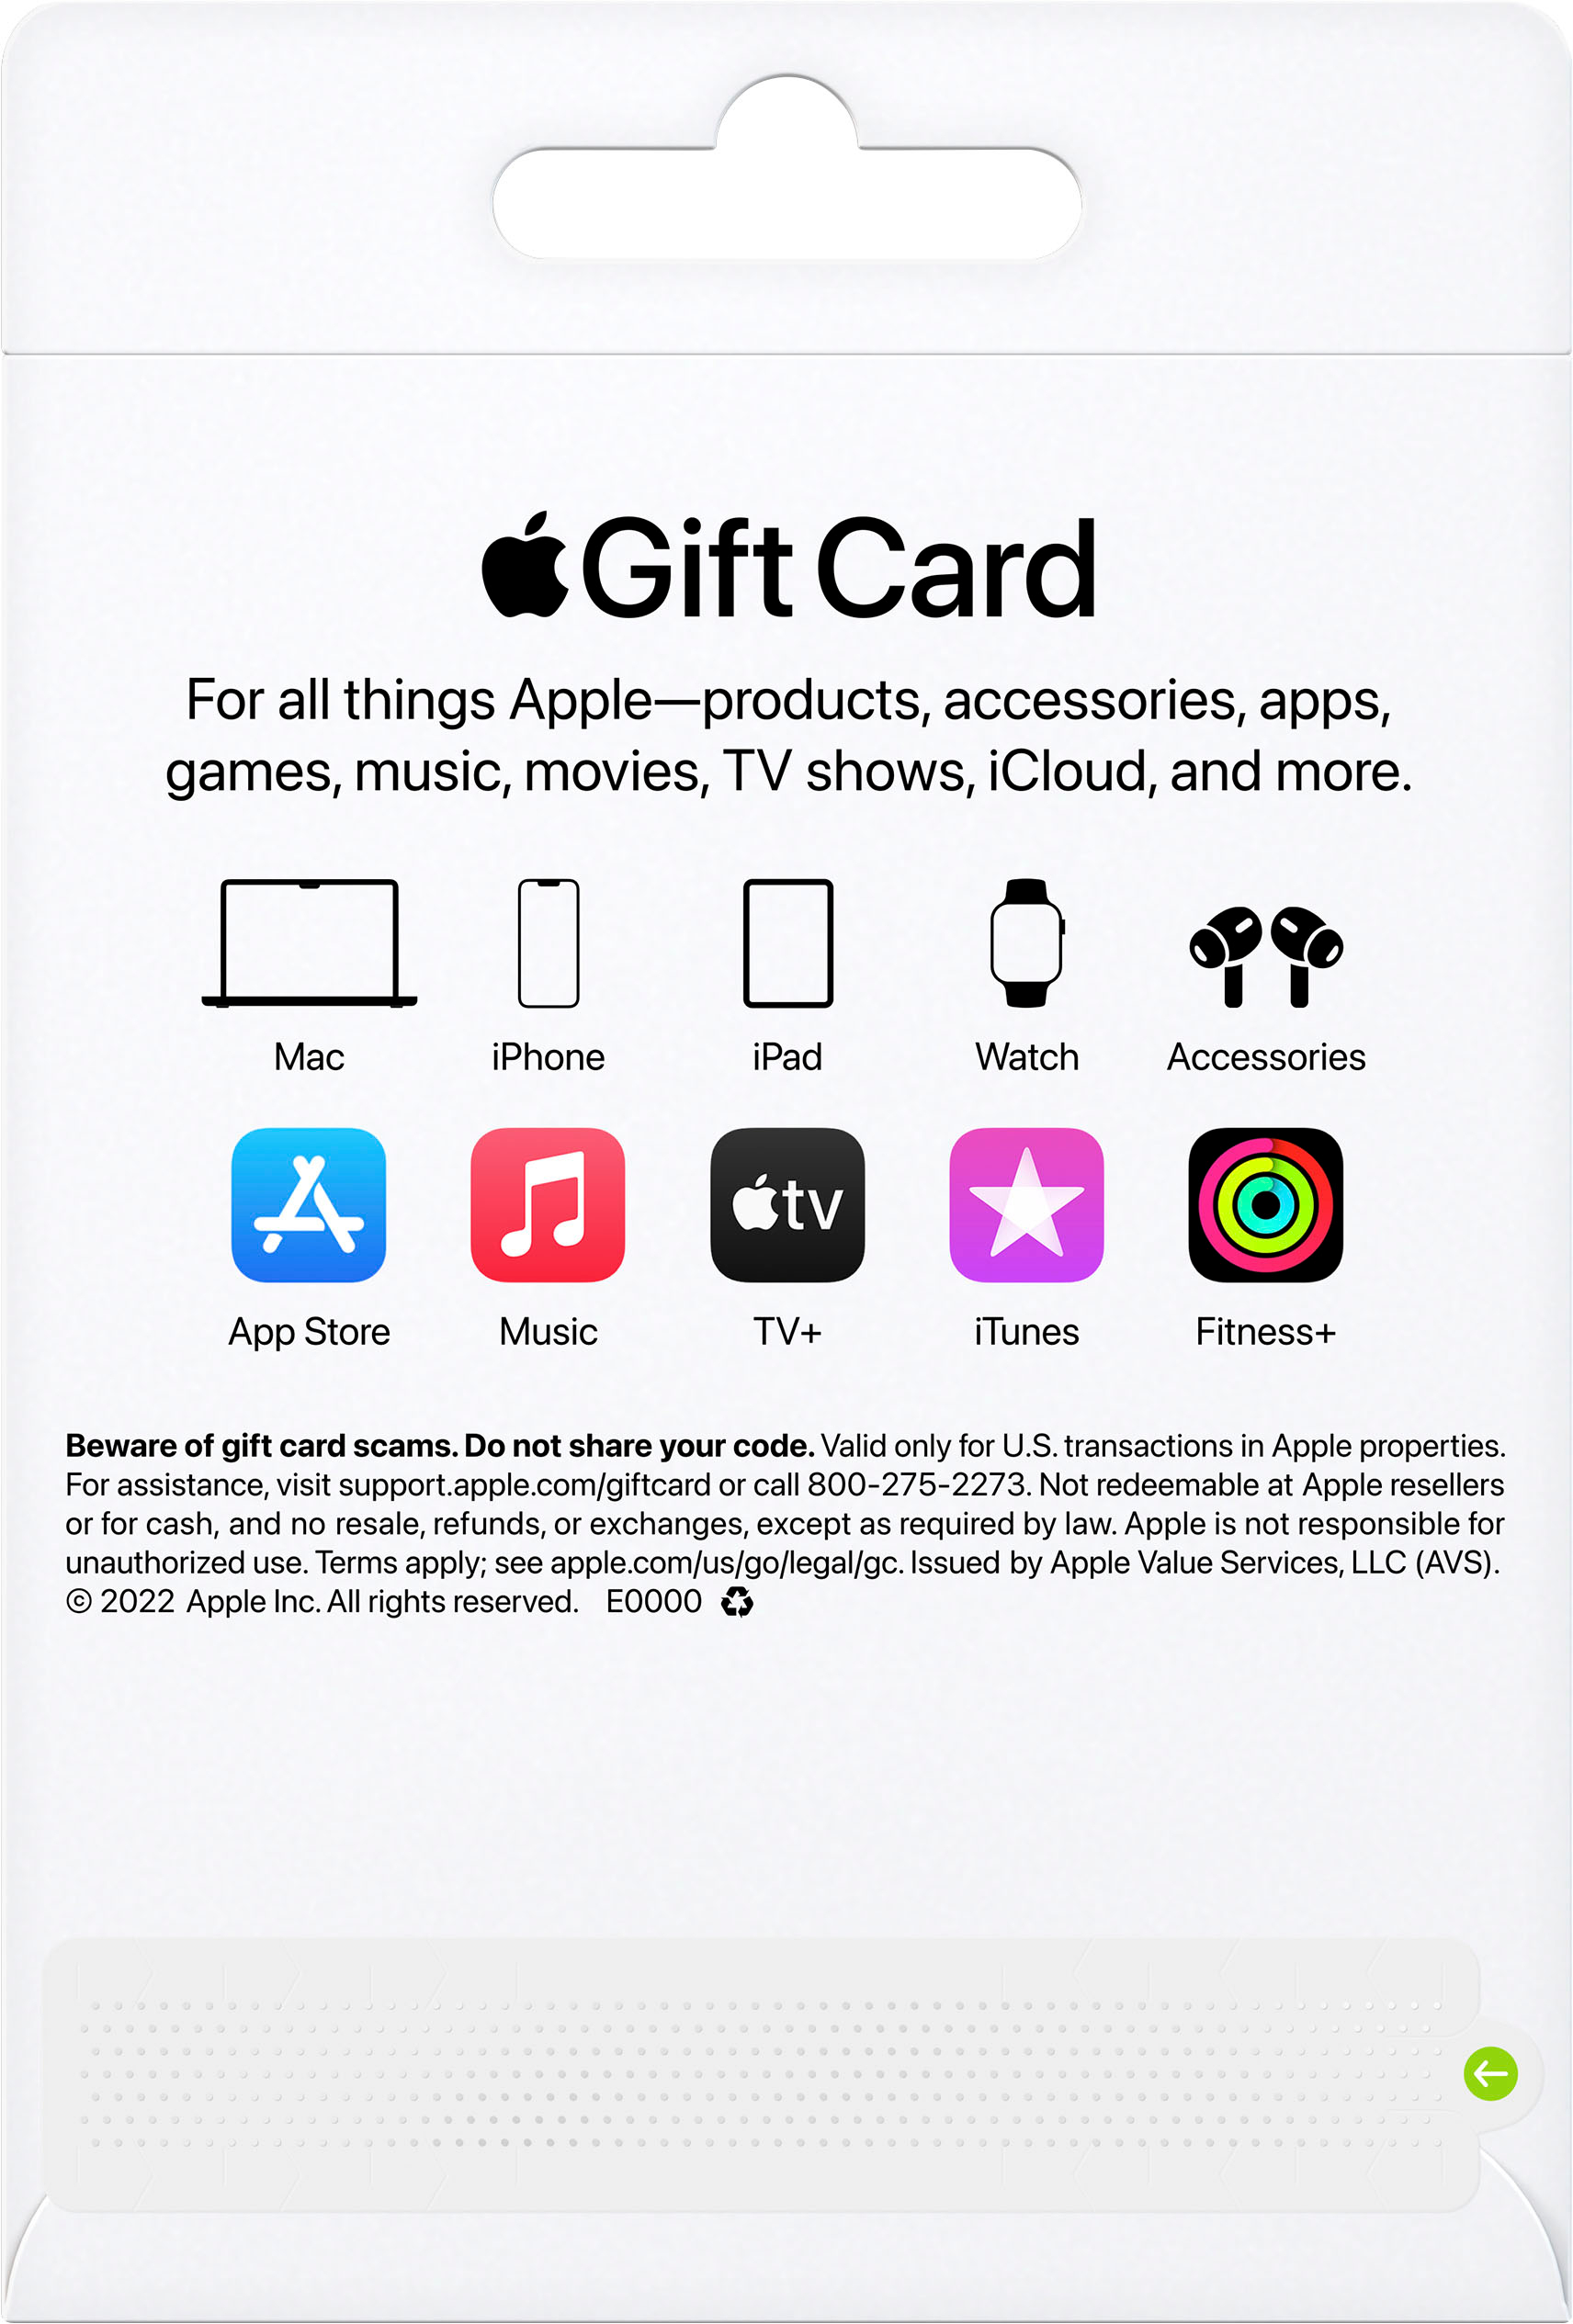 How to redeem iTunes or Apple Music gift cards